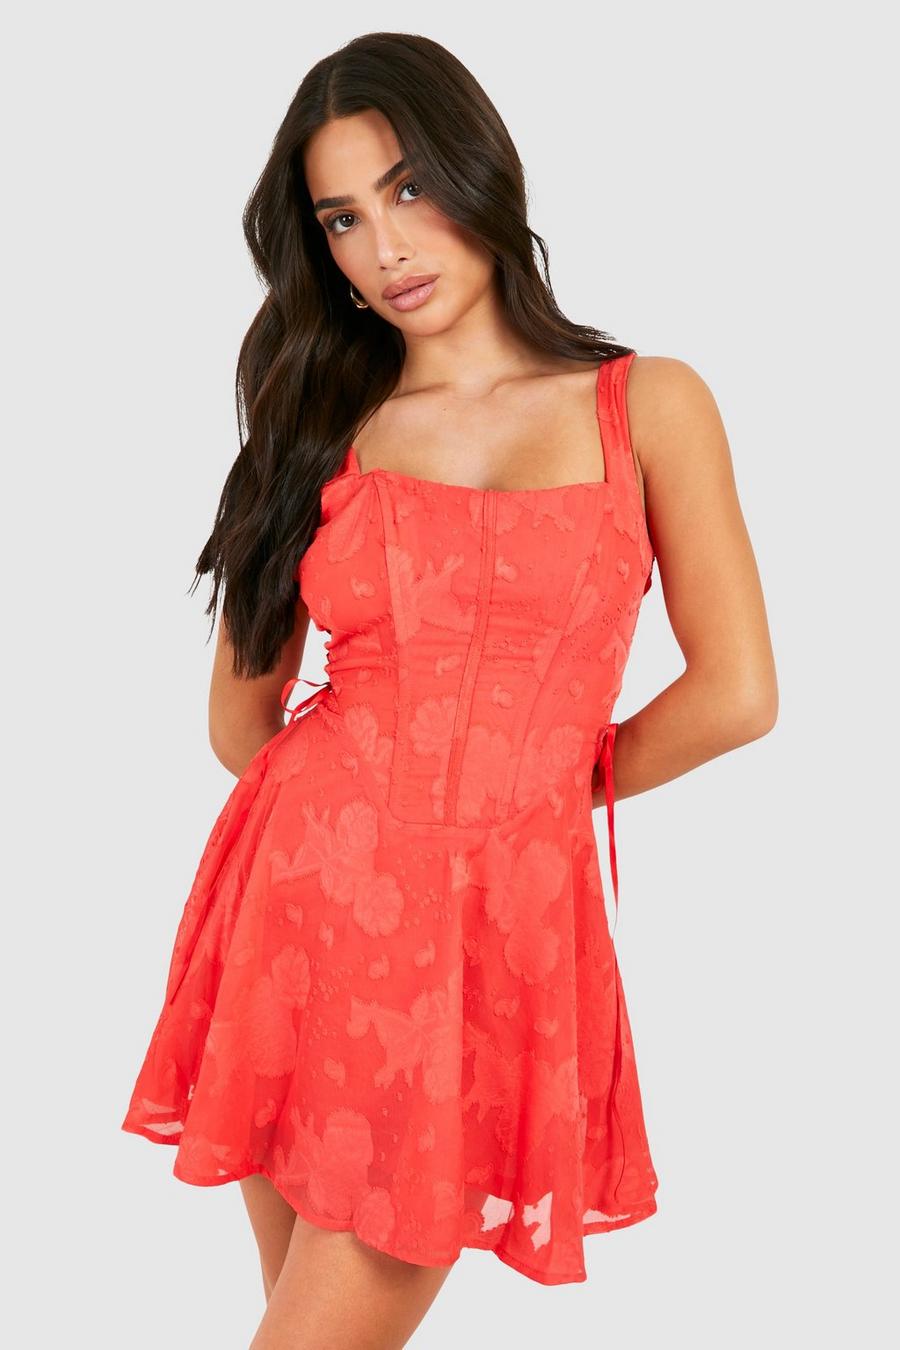 Petite - Robe corset fleurie, Tomato red image number 1